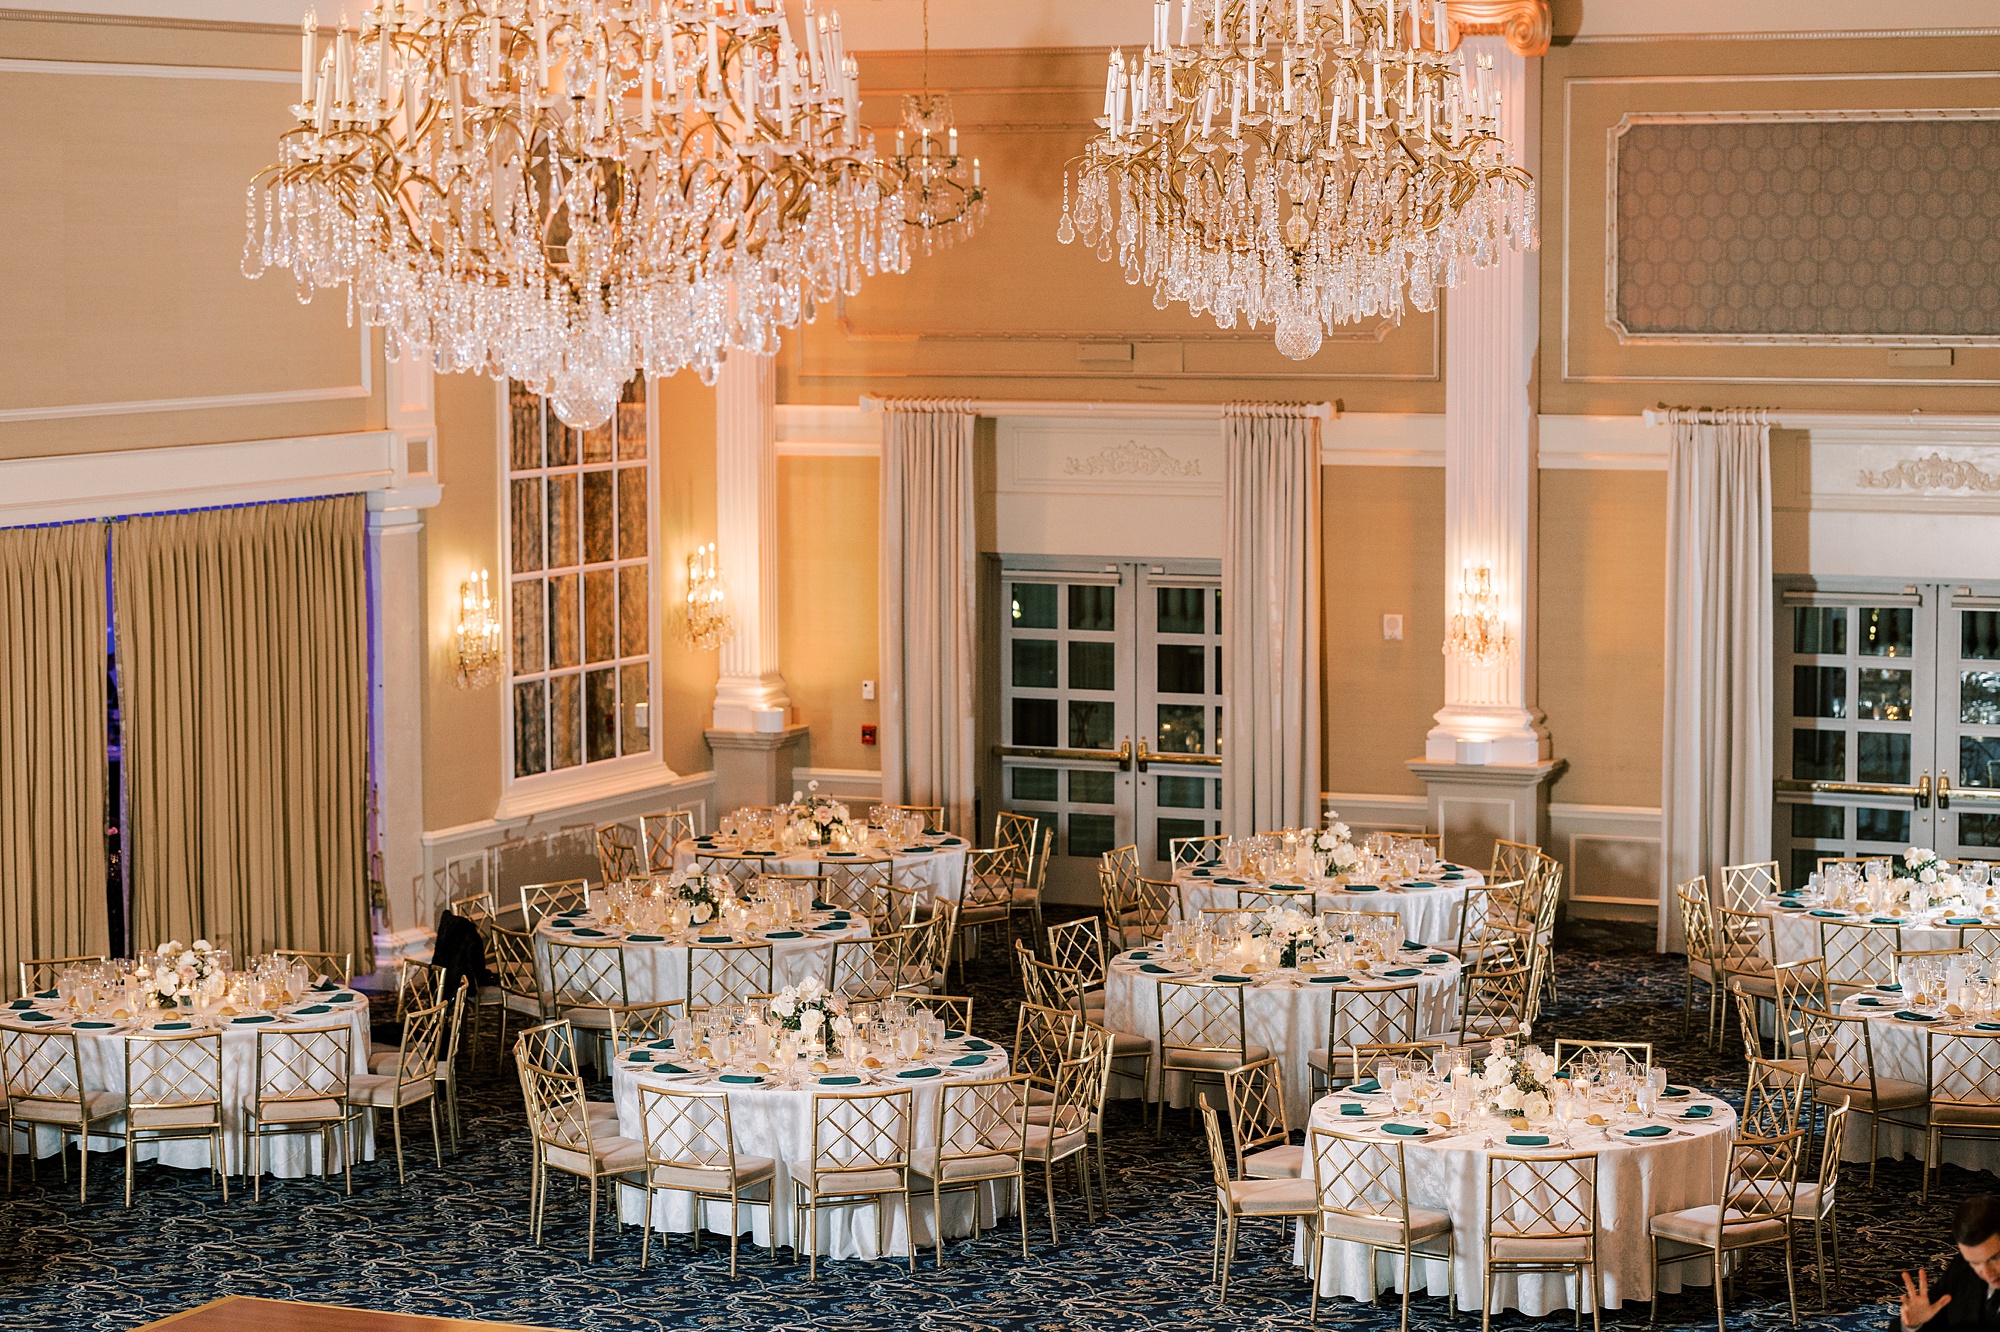 New Year's Eve wedding reception at The Palace at Somerset Park